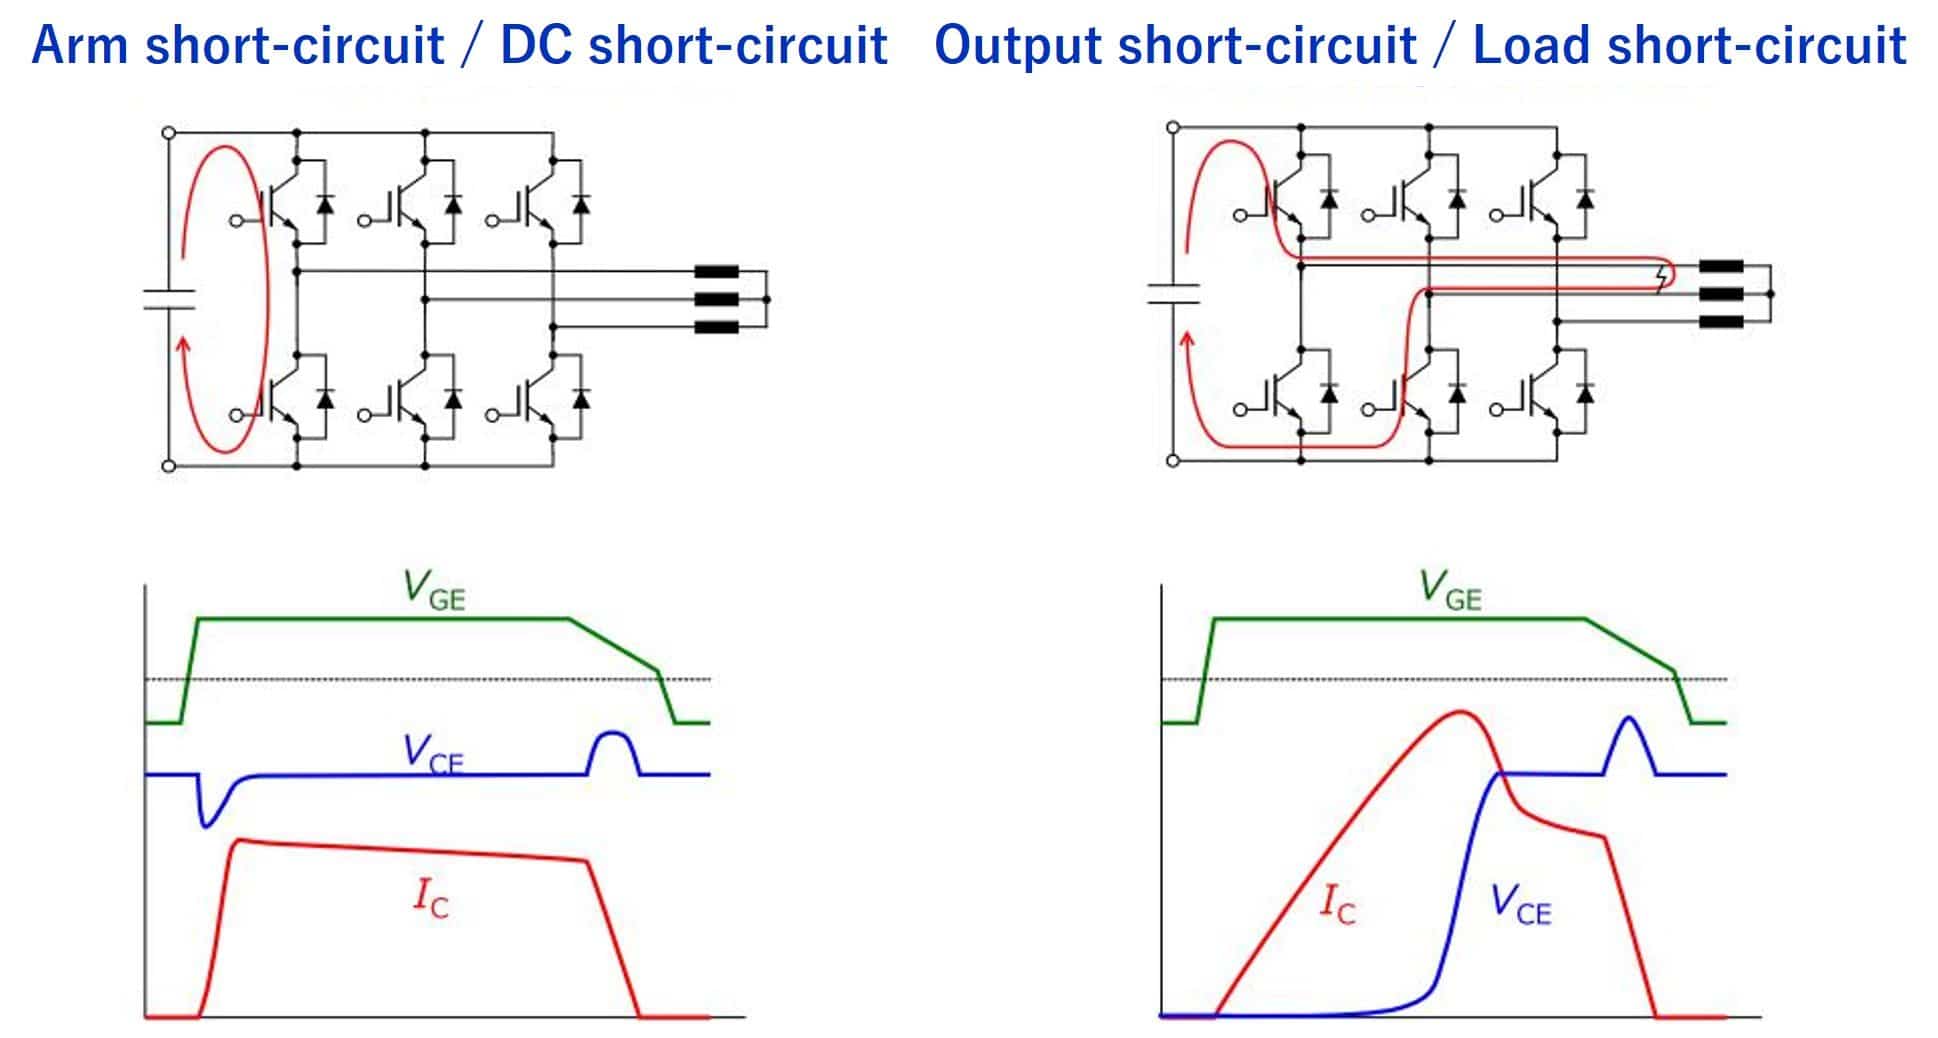 What is the difference between DC short circuit (arm short circuit) and